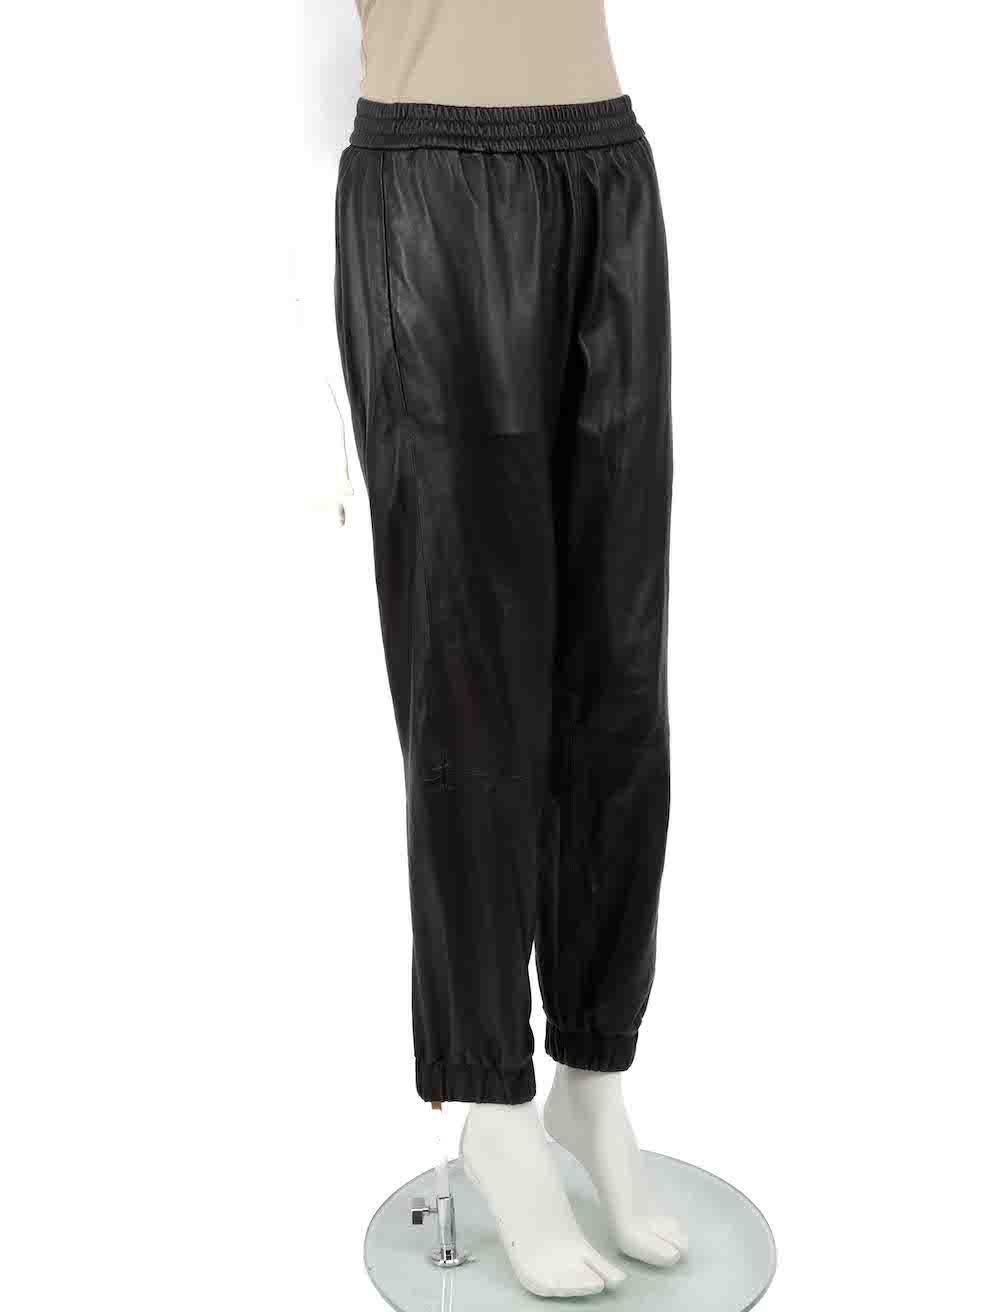 CONDITION is Very good. Hardly any visible wear to trousers is evident on this used All Saints designer resale item.
 
 
 
 Details
 
 
 Model: Jen Cuff Joggers
 
 Black
 
 Leather
 
 Trousers
 
 Tapered
 
 High rise
 
 Elasticated cuffs
 
